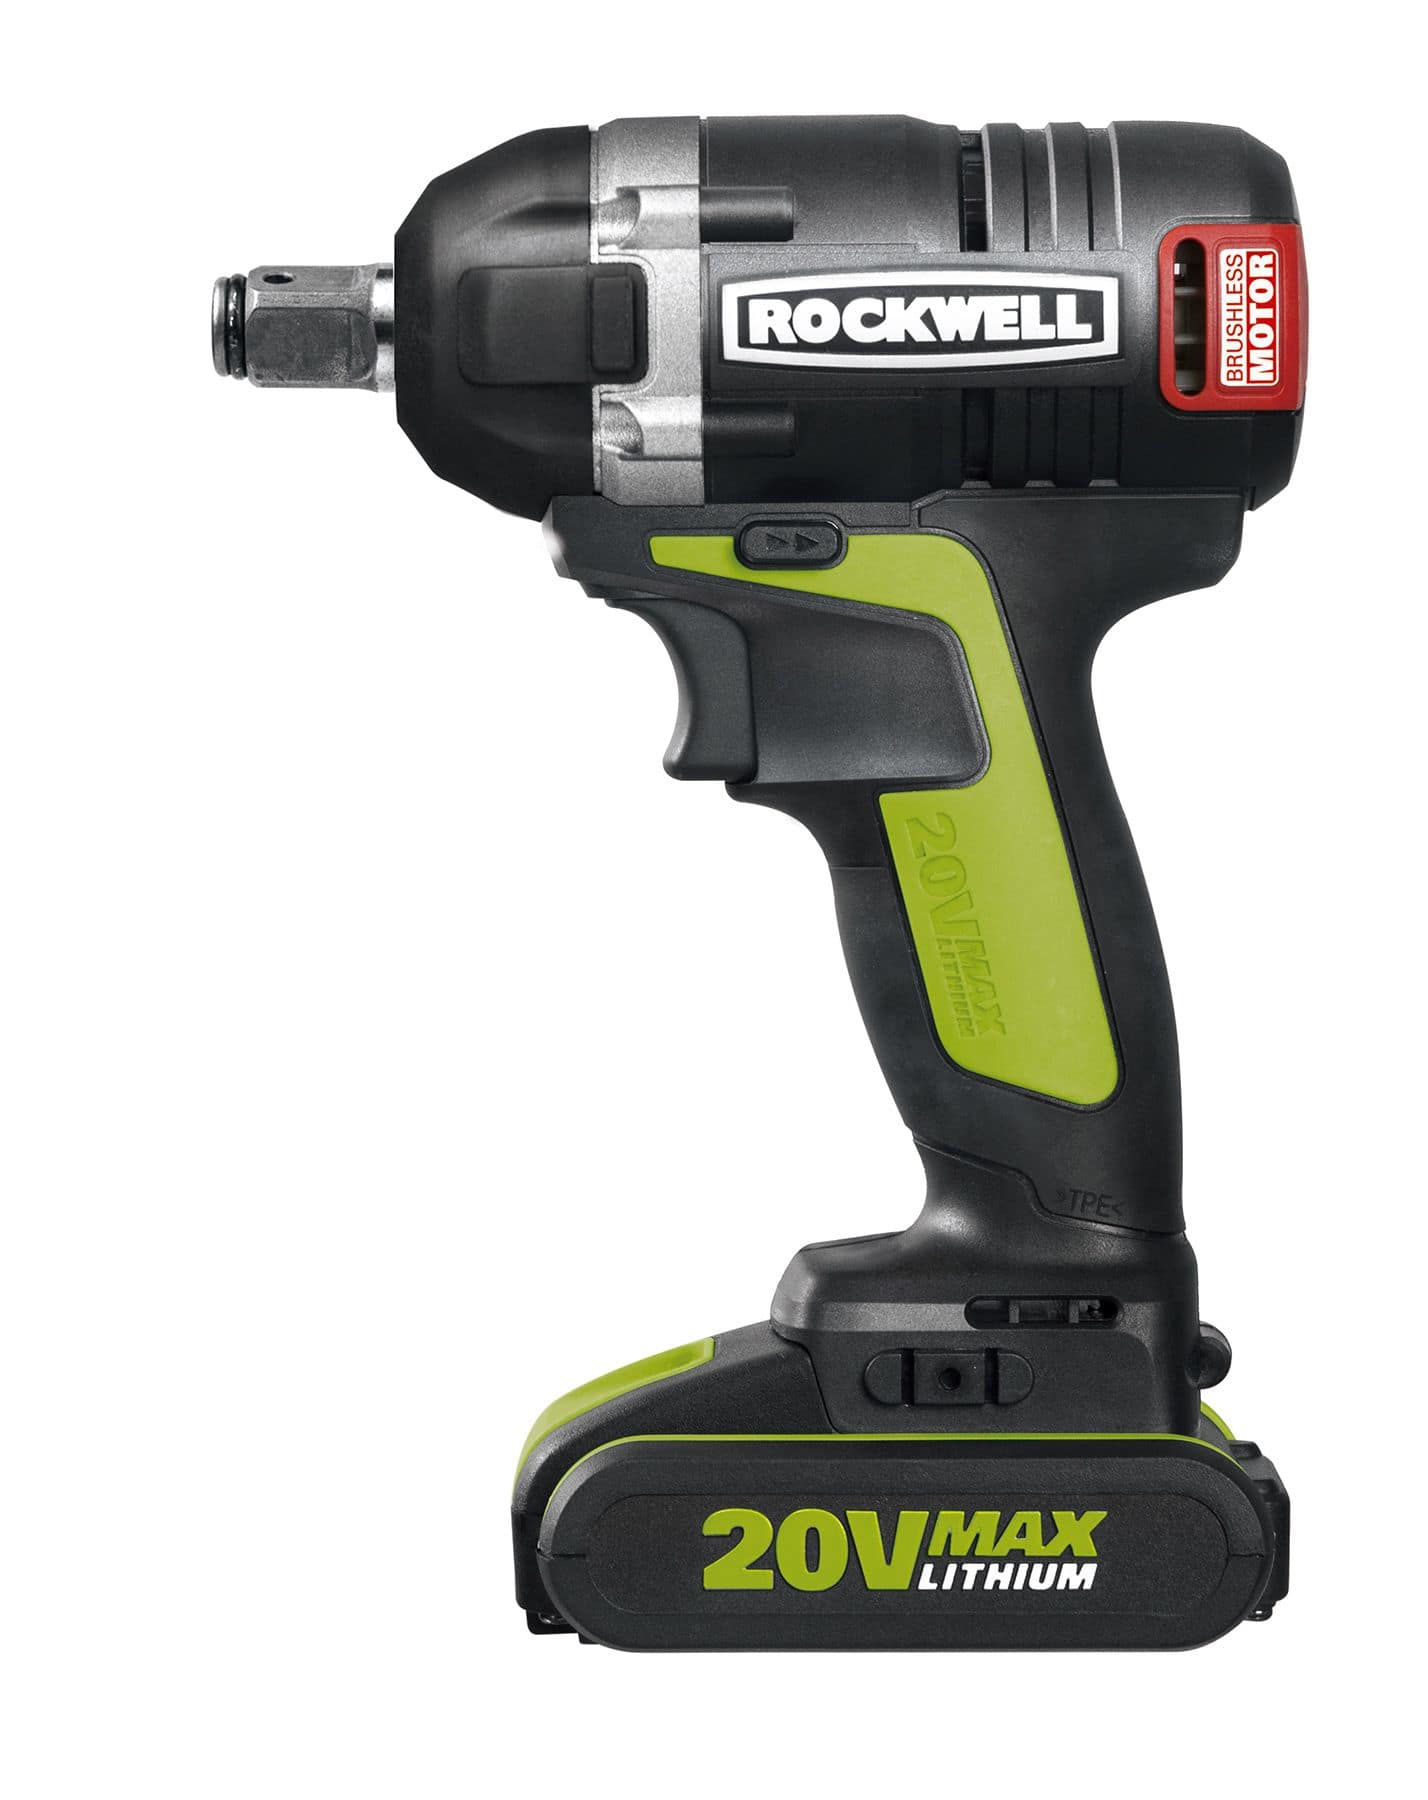 Rockwell 20V Max Li-Ion Brushless Cordless Impact Wrench, 1/2-in